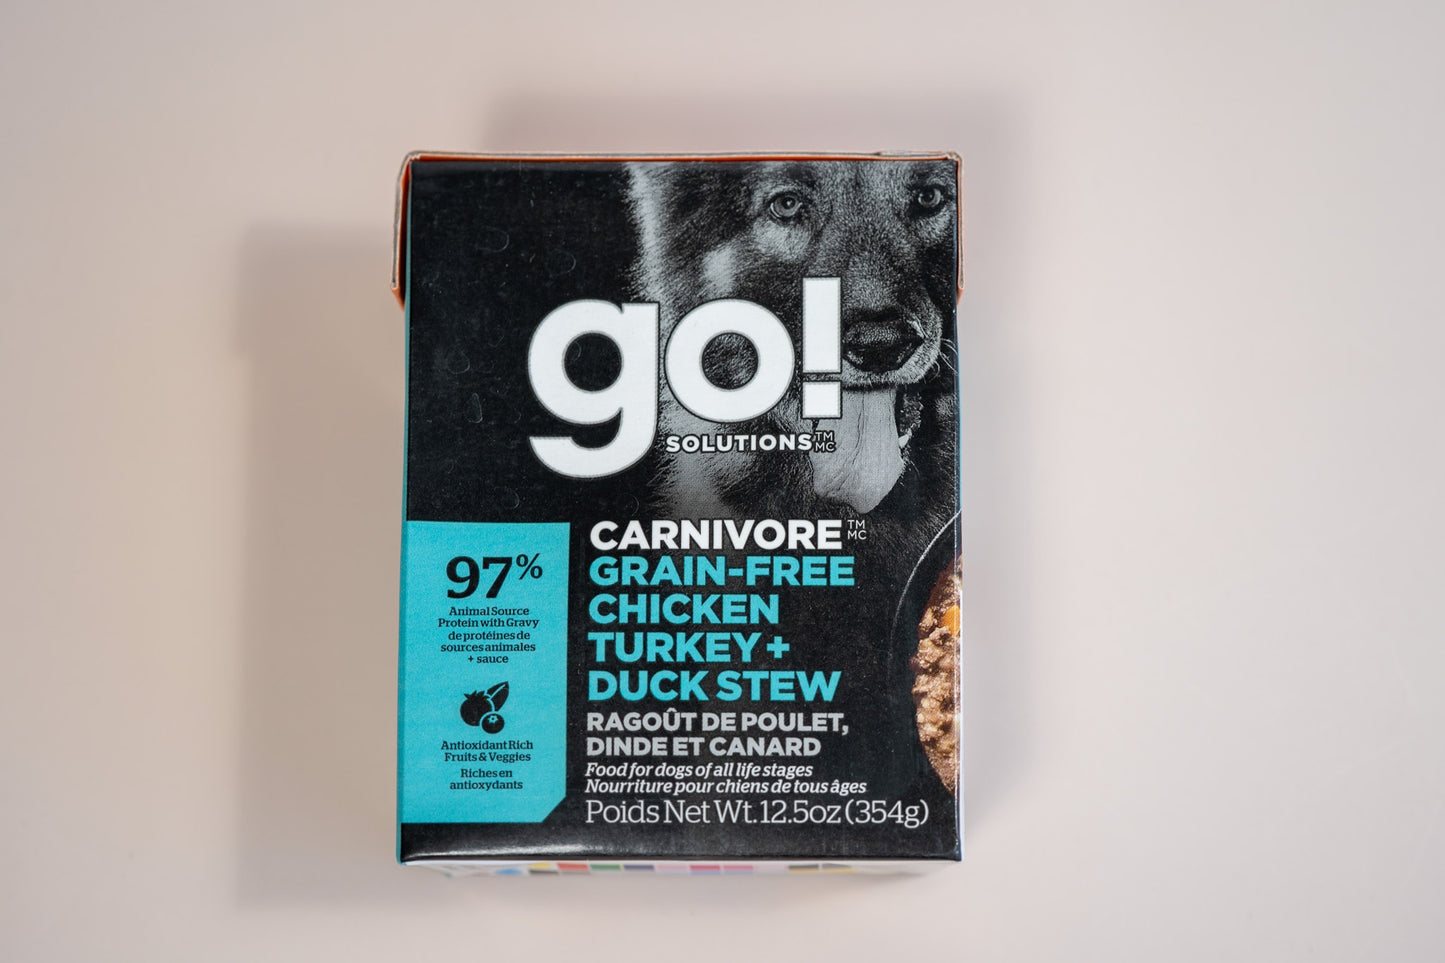 Chicken, turkey and duck stew food for dogs of all life stages with 97% animal source protein with gravy and antioxidant rich fruits and veggies.